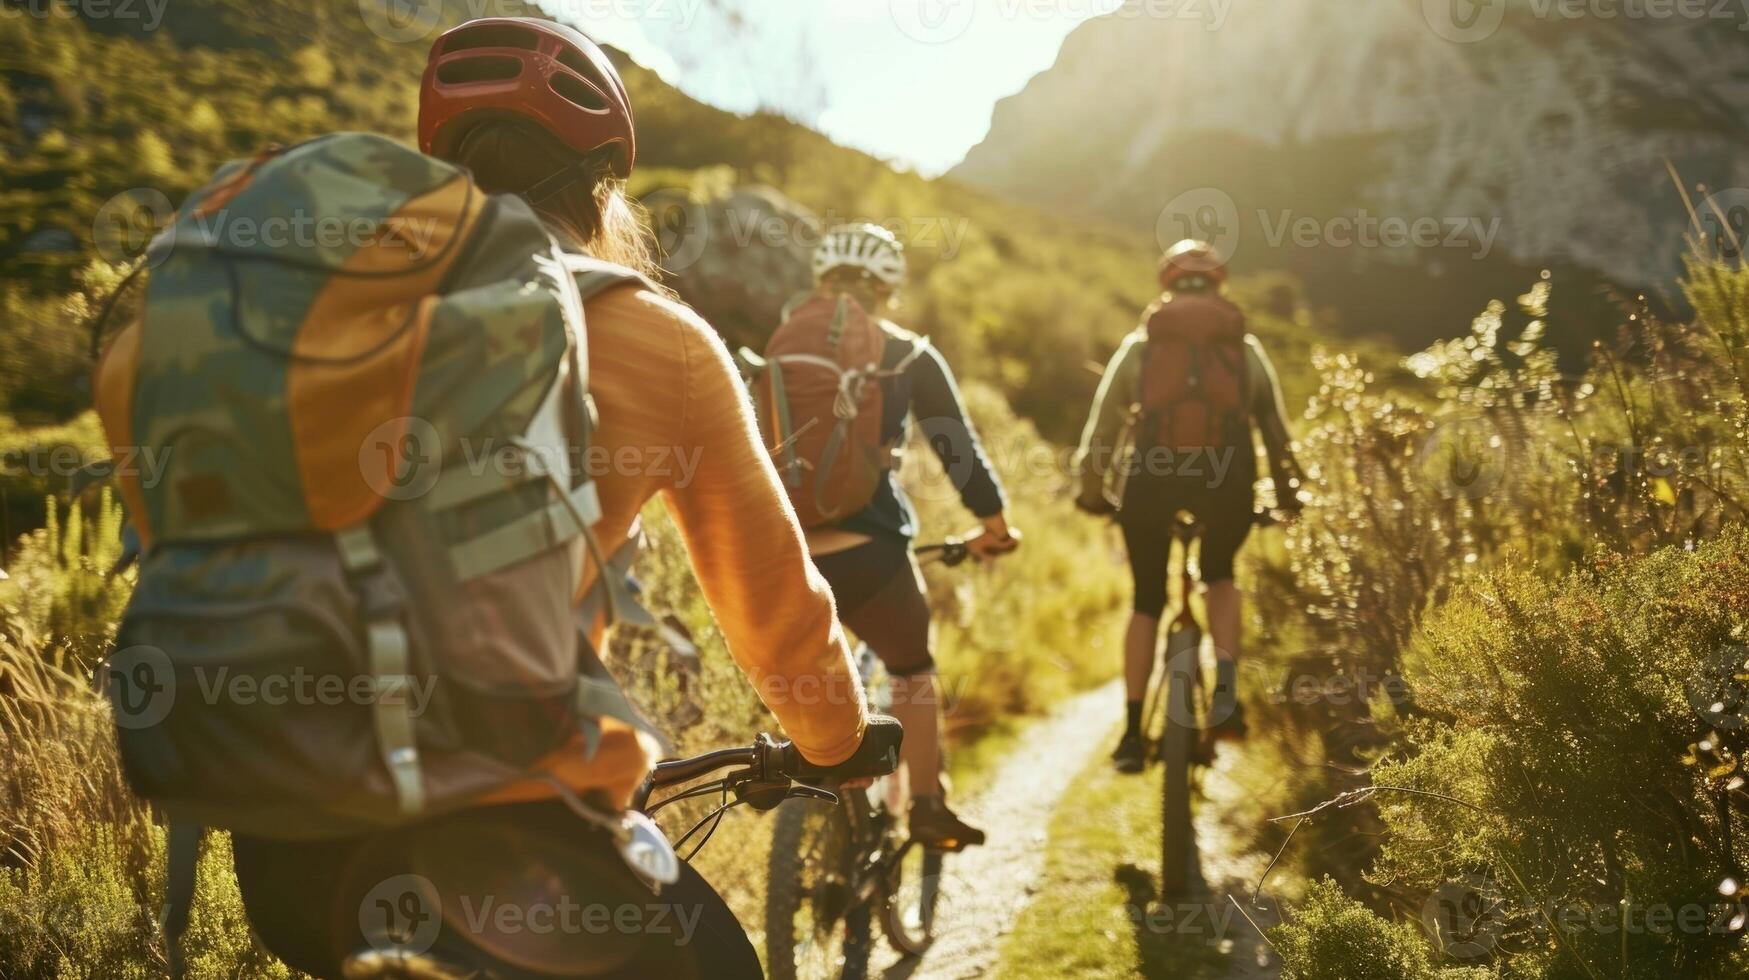 A group enjoying a guided bike tour through scenic routes getting a workout and experiencing the sights and sounds of a new destination on their sober trip photo